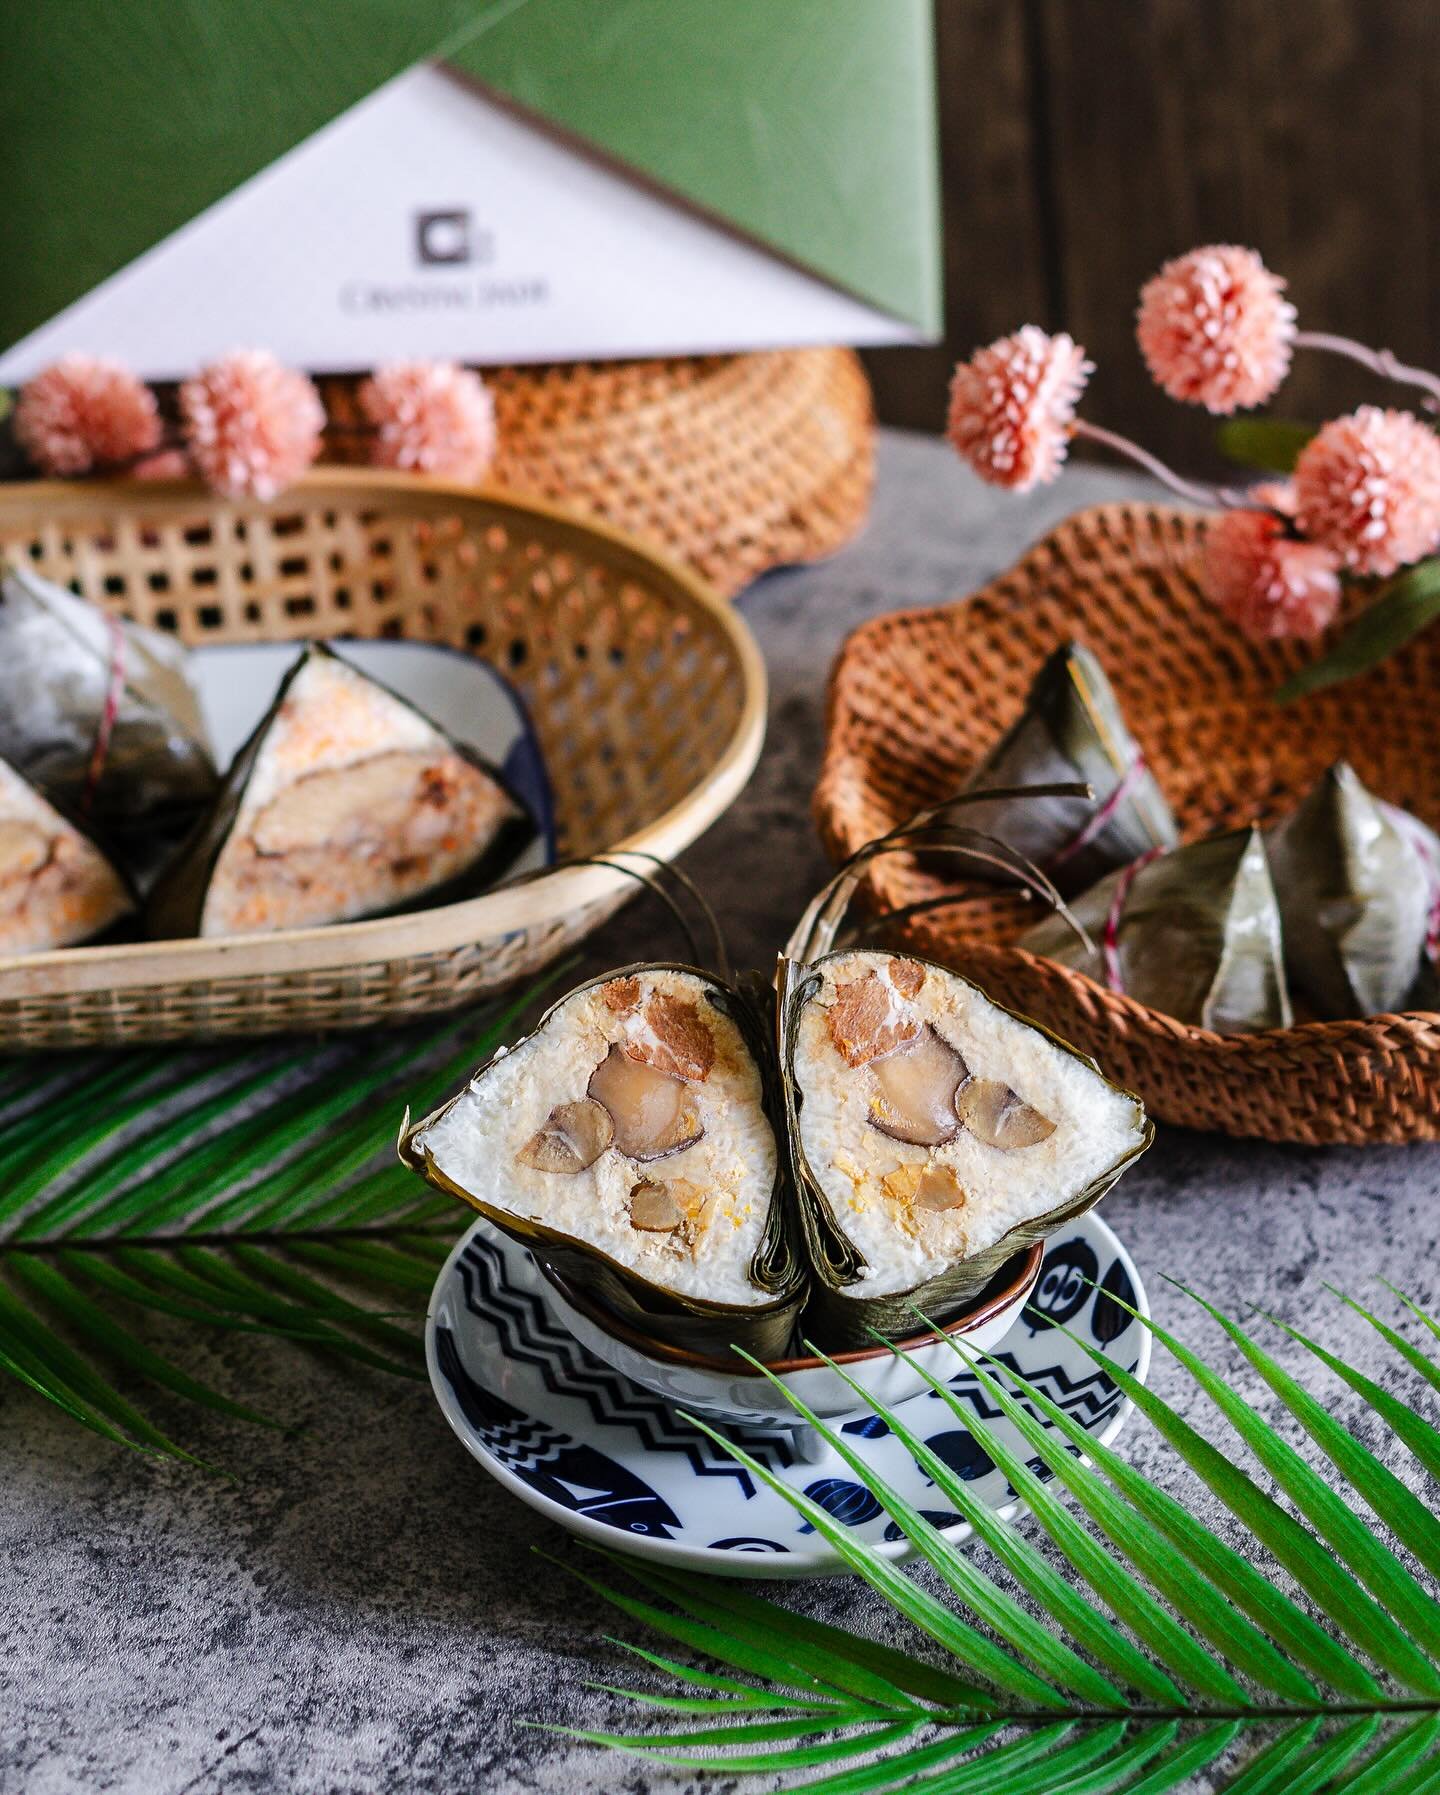 🐉🚣 It&rsquo;s that time of the year again! #DragonBoatFestival is one of my fav seasons and I love the fragrance of 肉粽 rice dumplings.

@CrystalJadeSG is always one of the earliest with their specials. You can order on their e-store (http://estore.